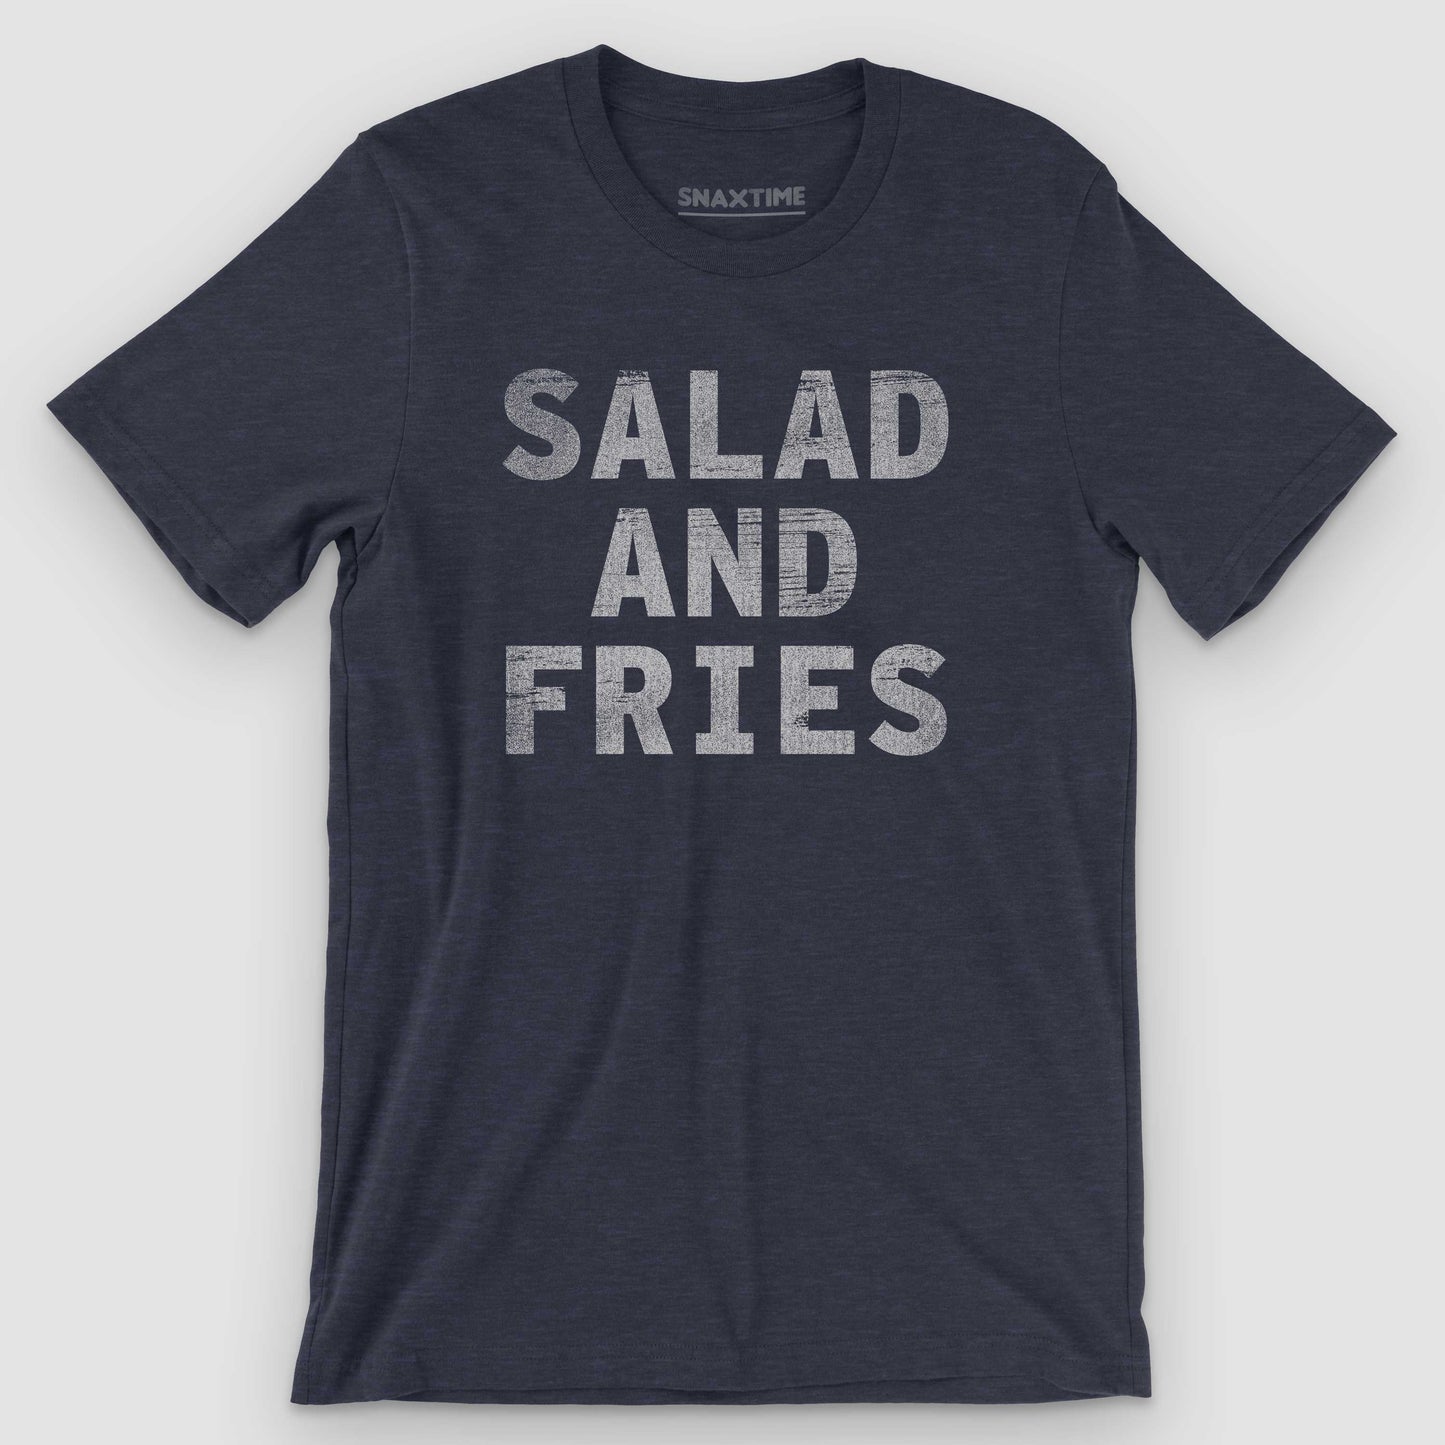 Heather Midnight Navy Salad and Fries Graphic T-Shirt by Snaxtime